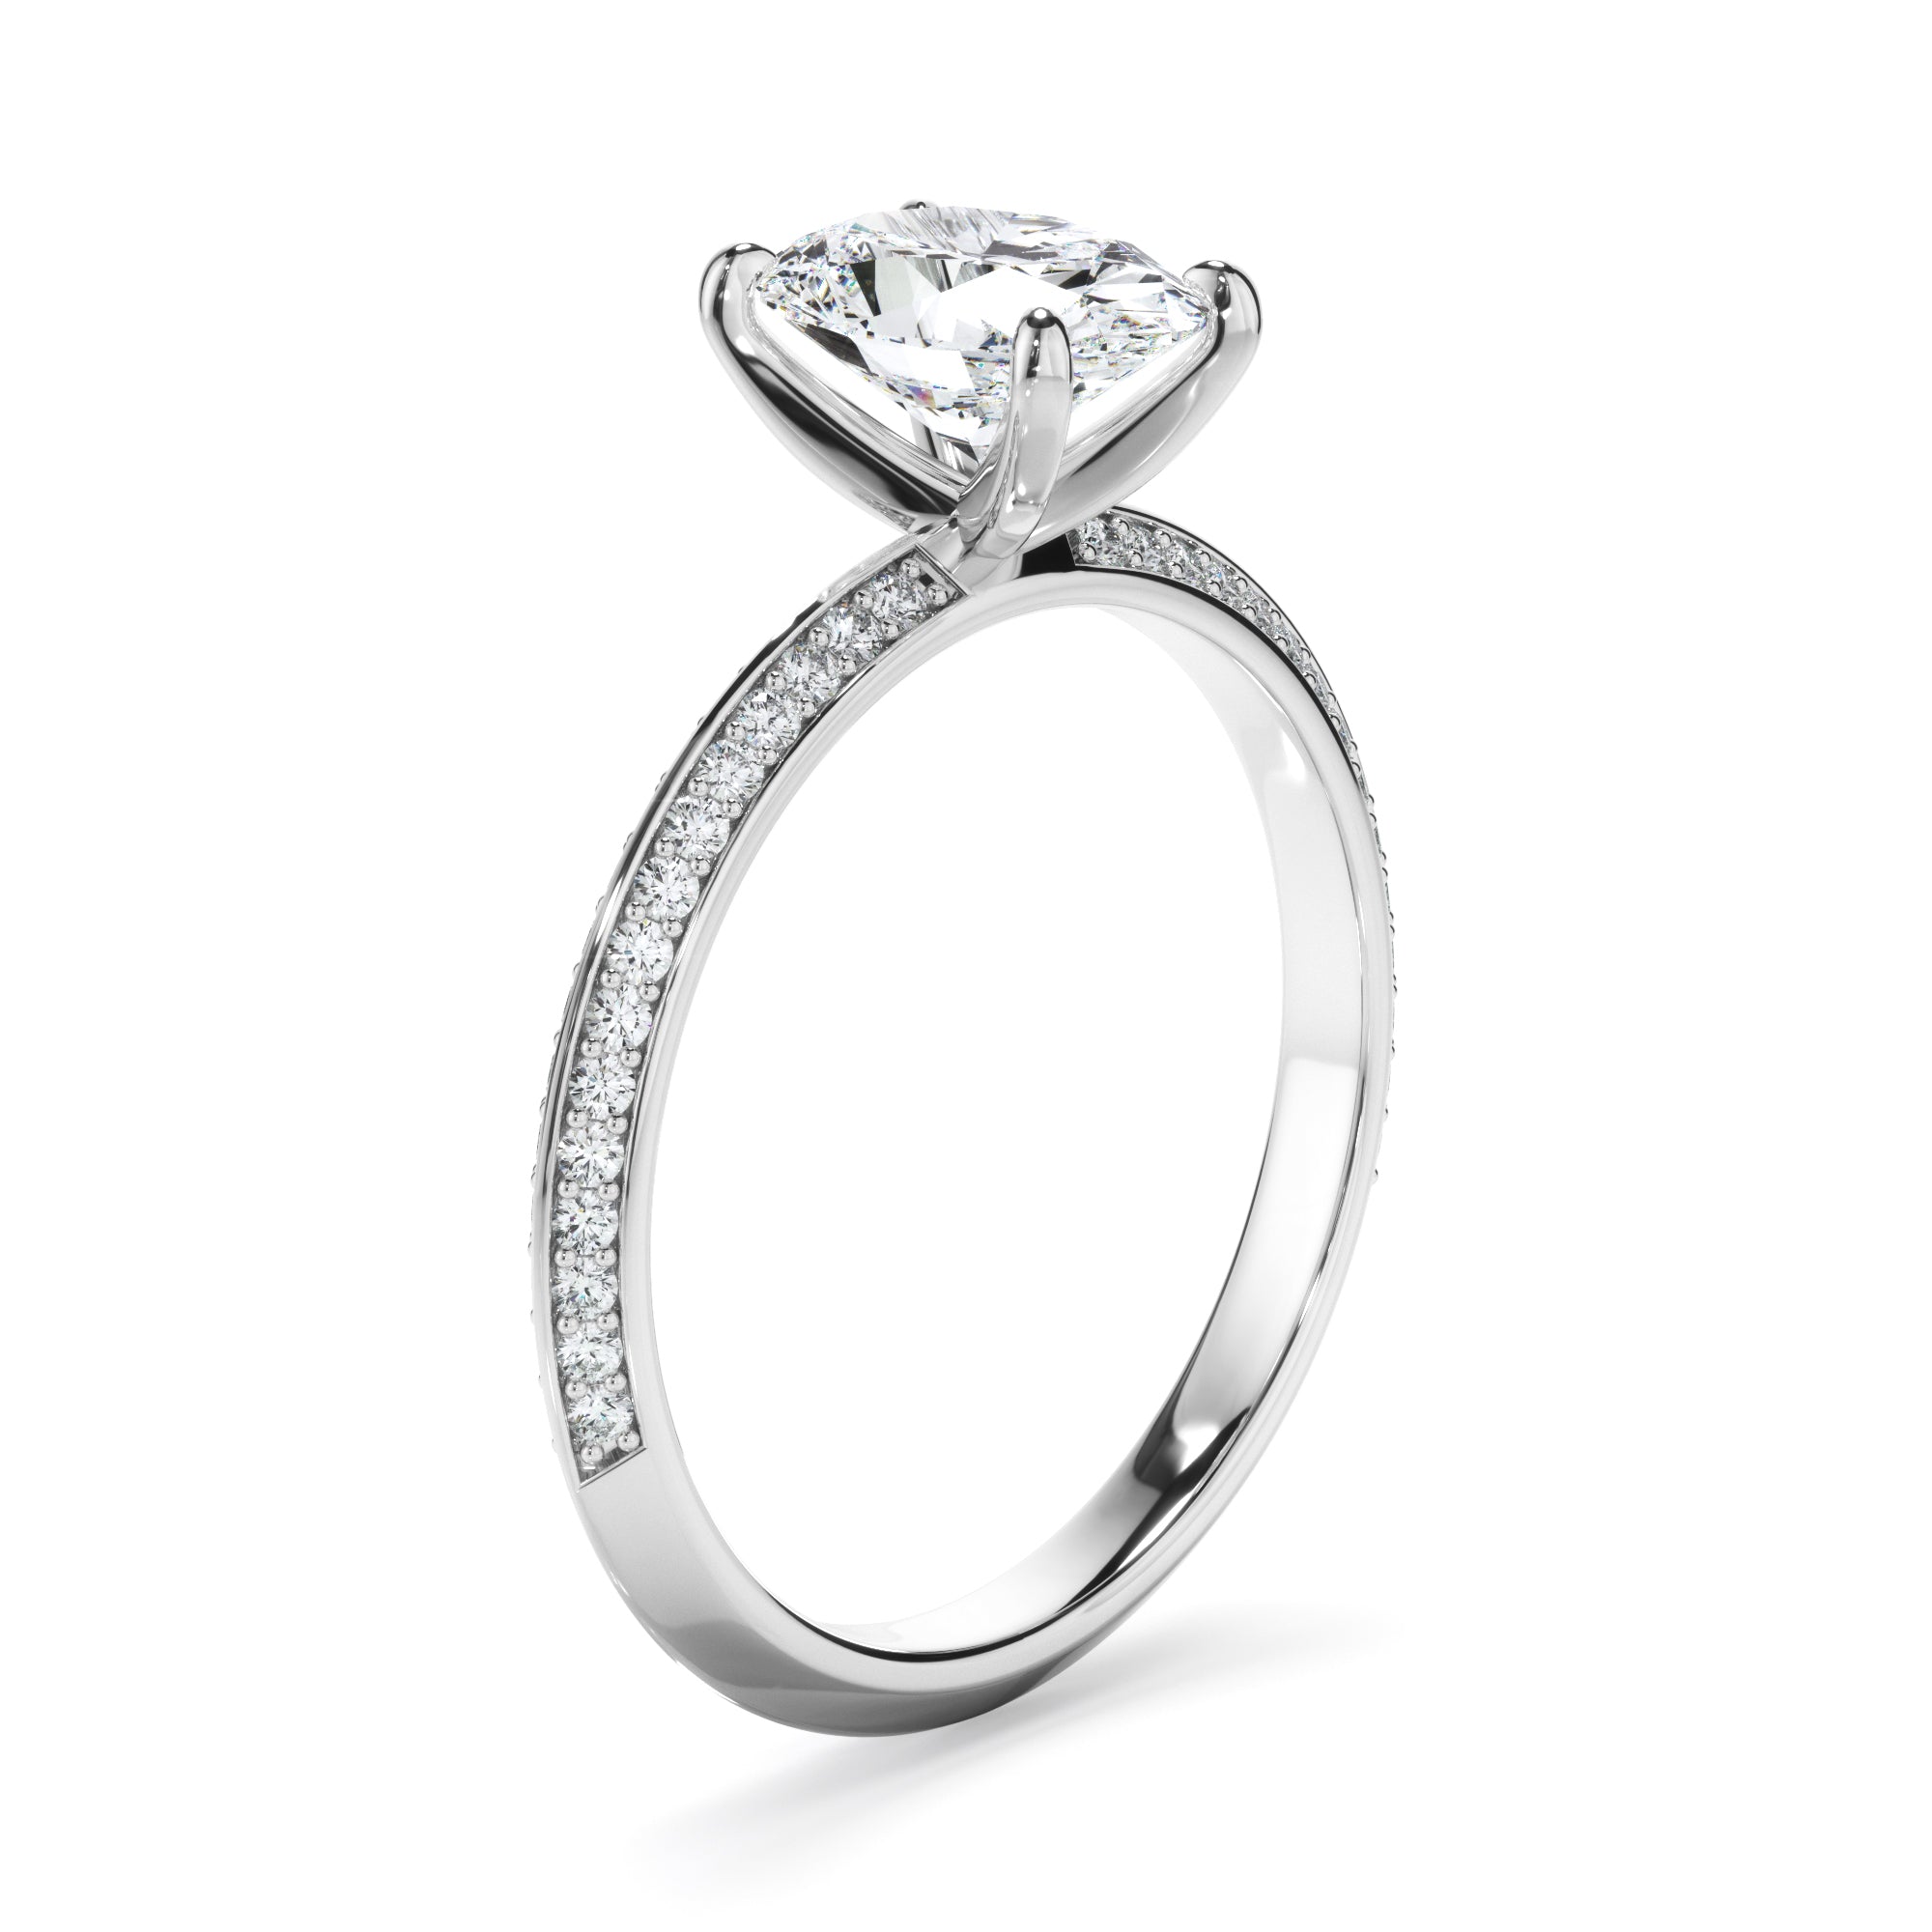 Oval Cut Diamond Knife Edge Engagement Ring With Diamond Pave Sides